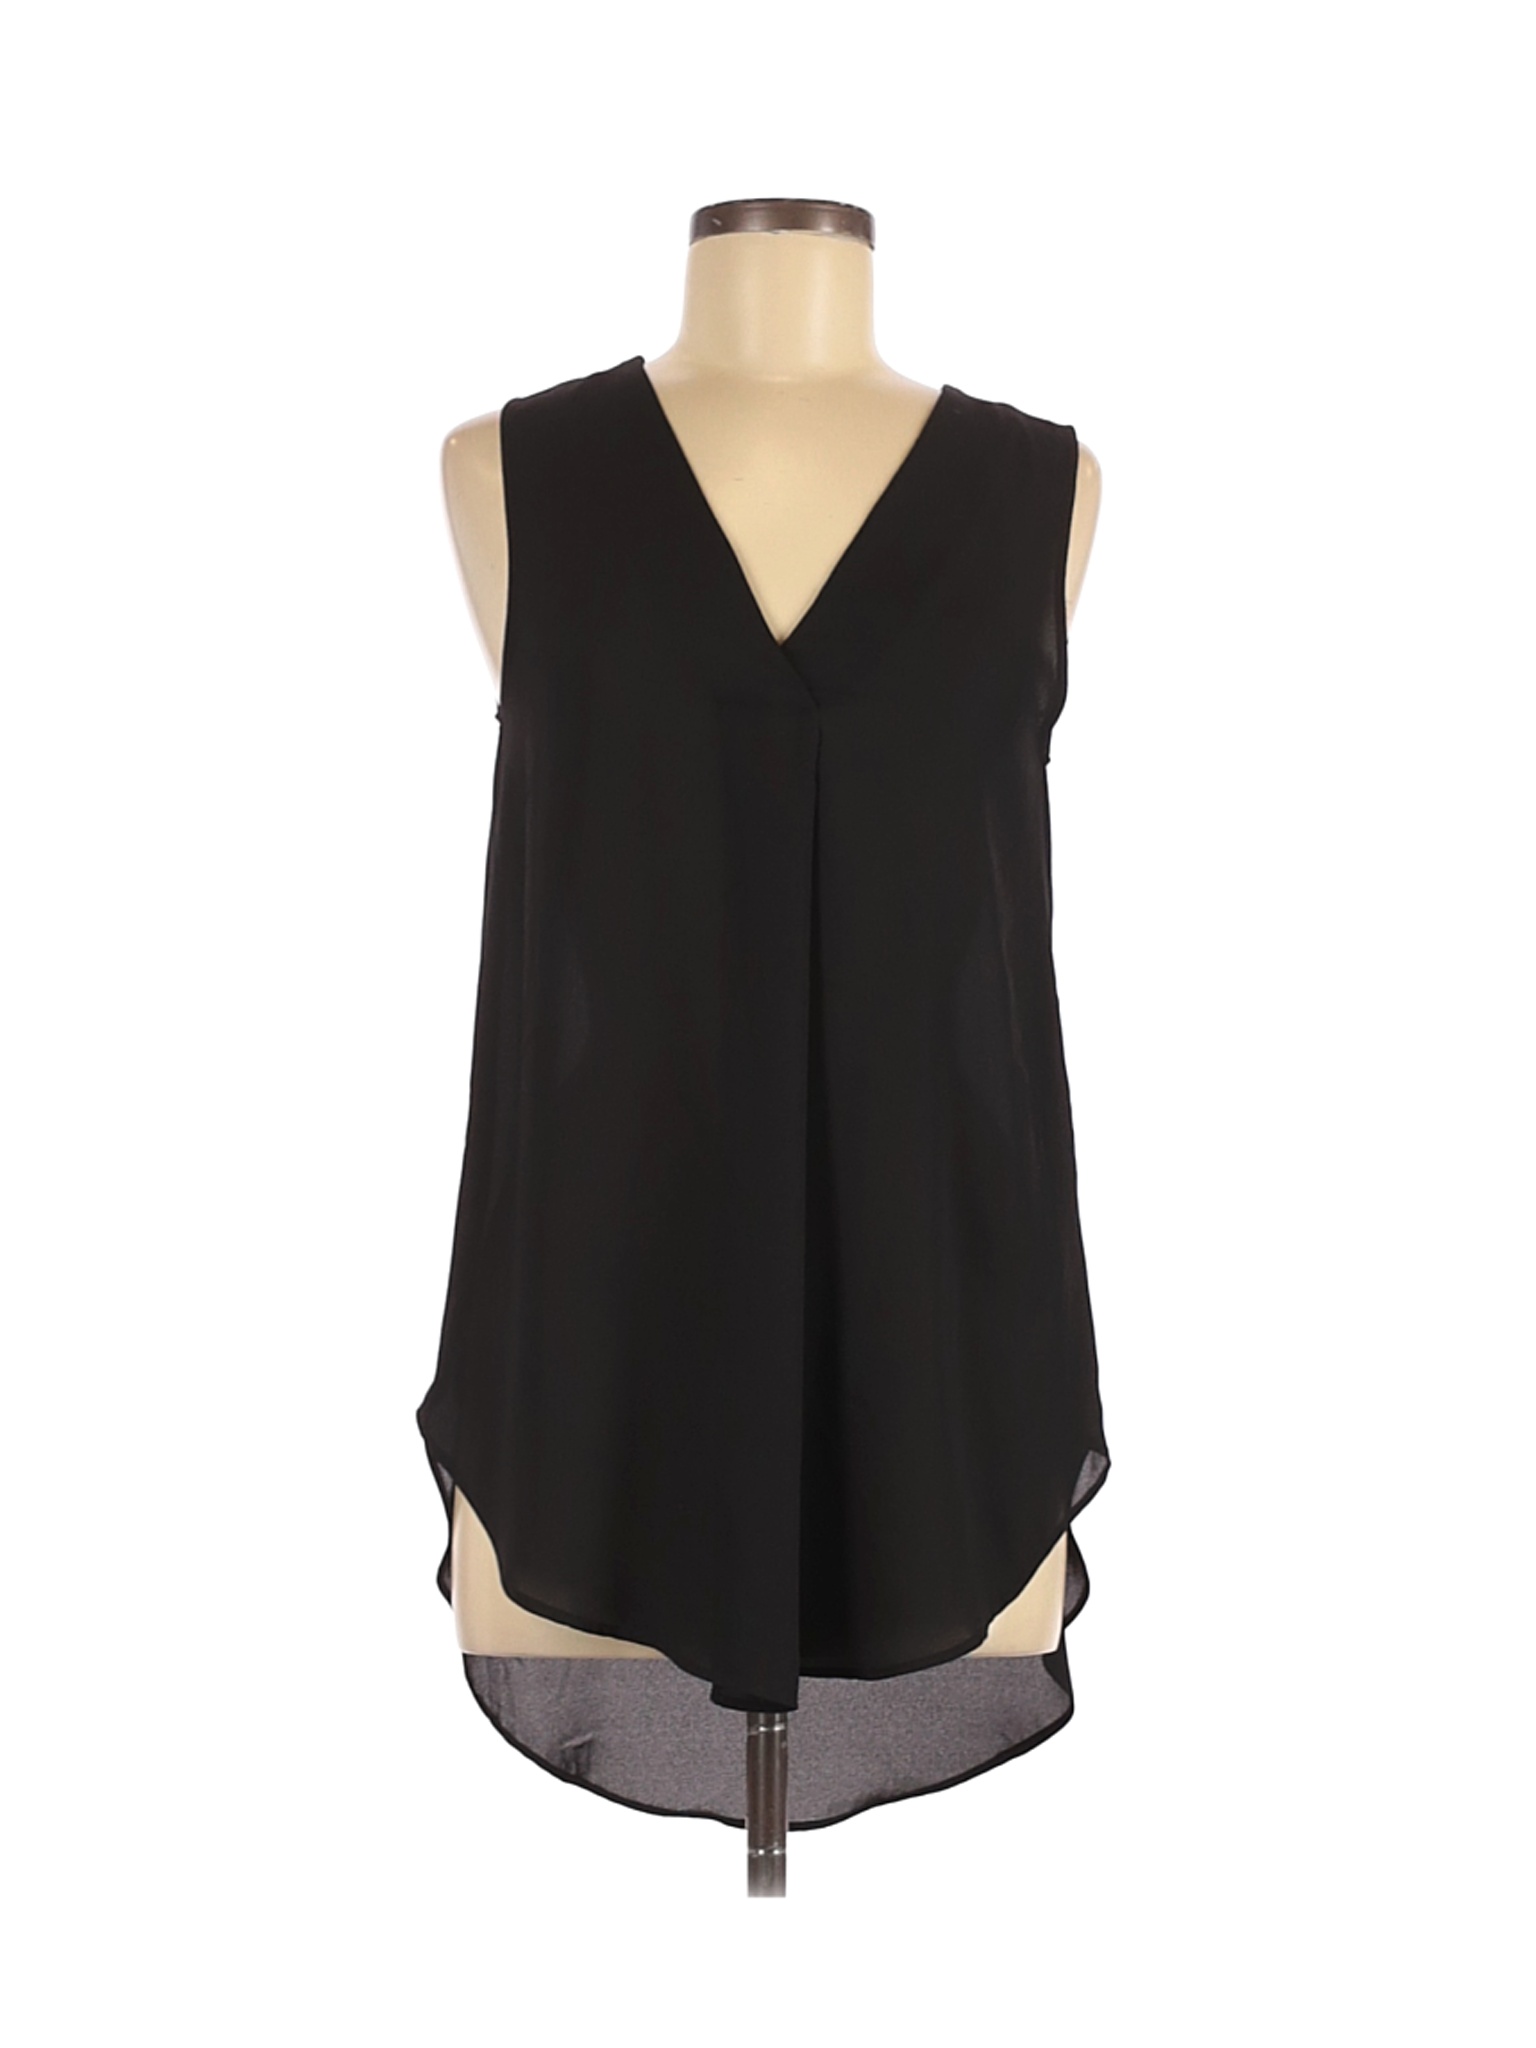 NWT Conscious Collection by H&M Women Black Sleeveless Blouse 6 | eBay